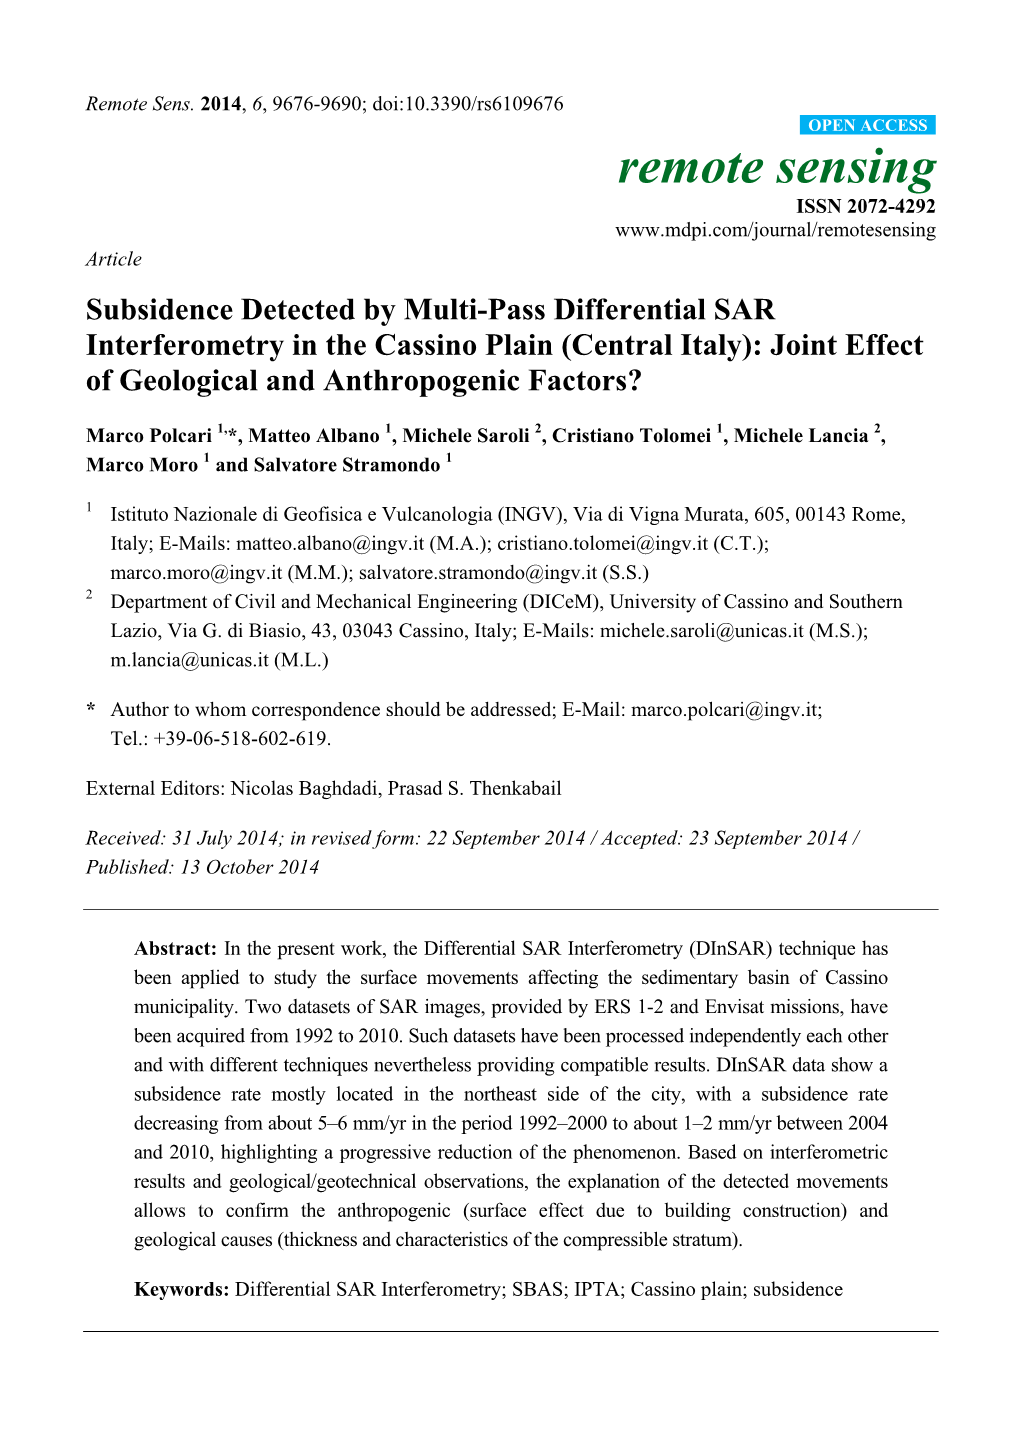 Subsidence Detected by Multi-Pass Differential SAR Interferometry in the Cassino Plain (Central Italy): Joint Effect of Geological and Anthropogenic Factors?